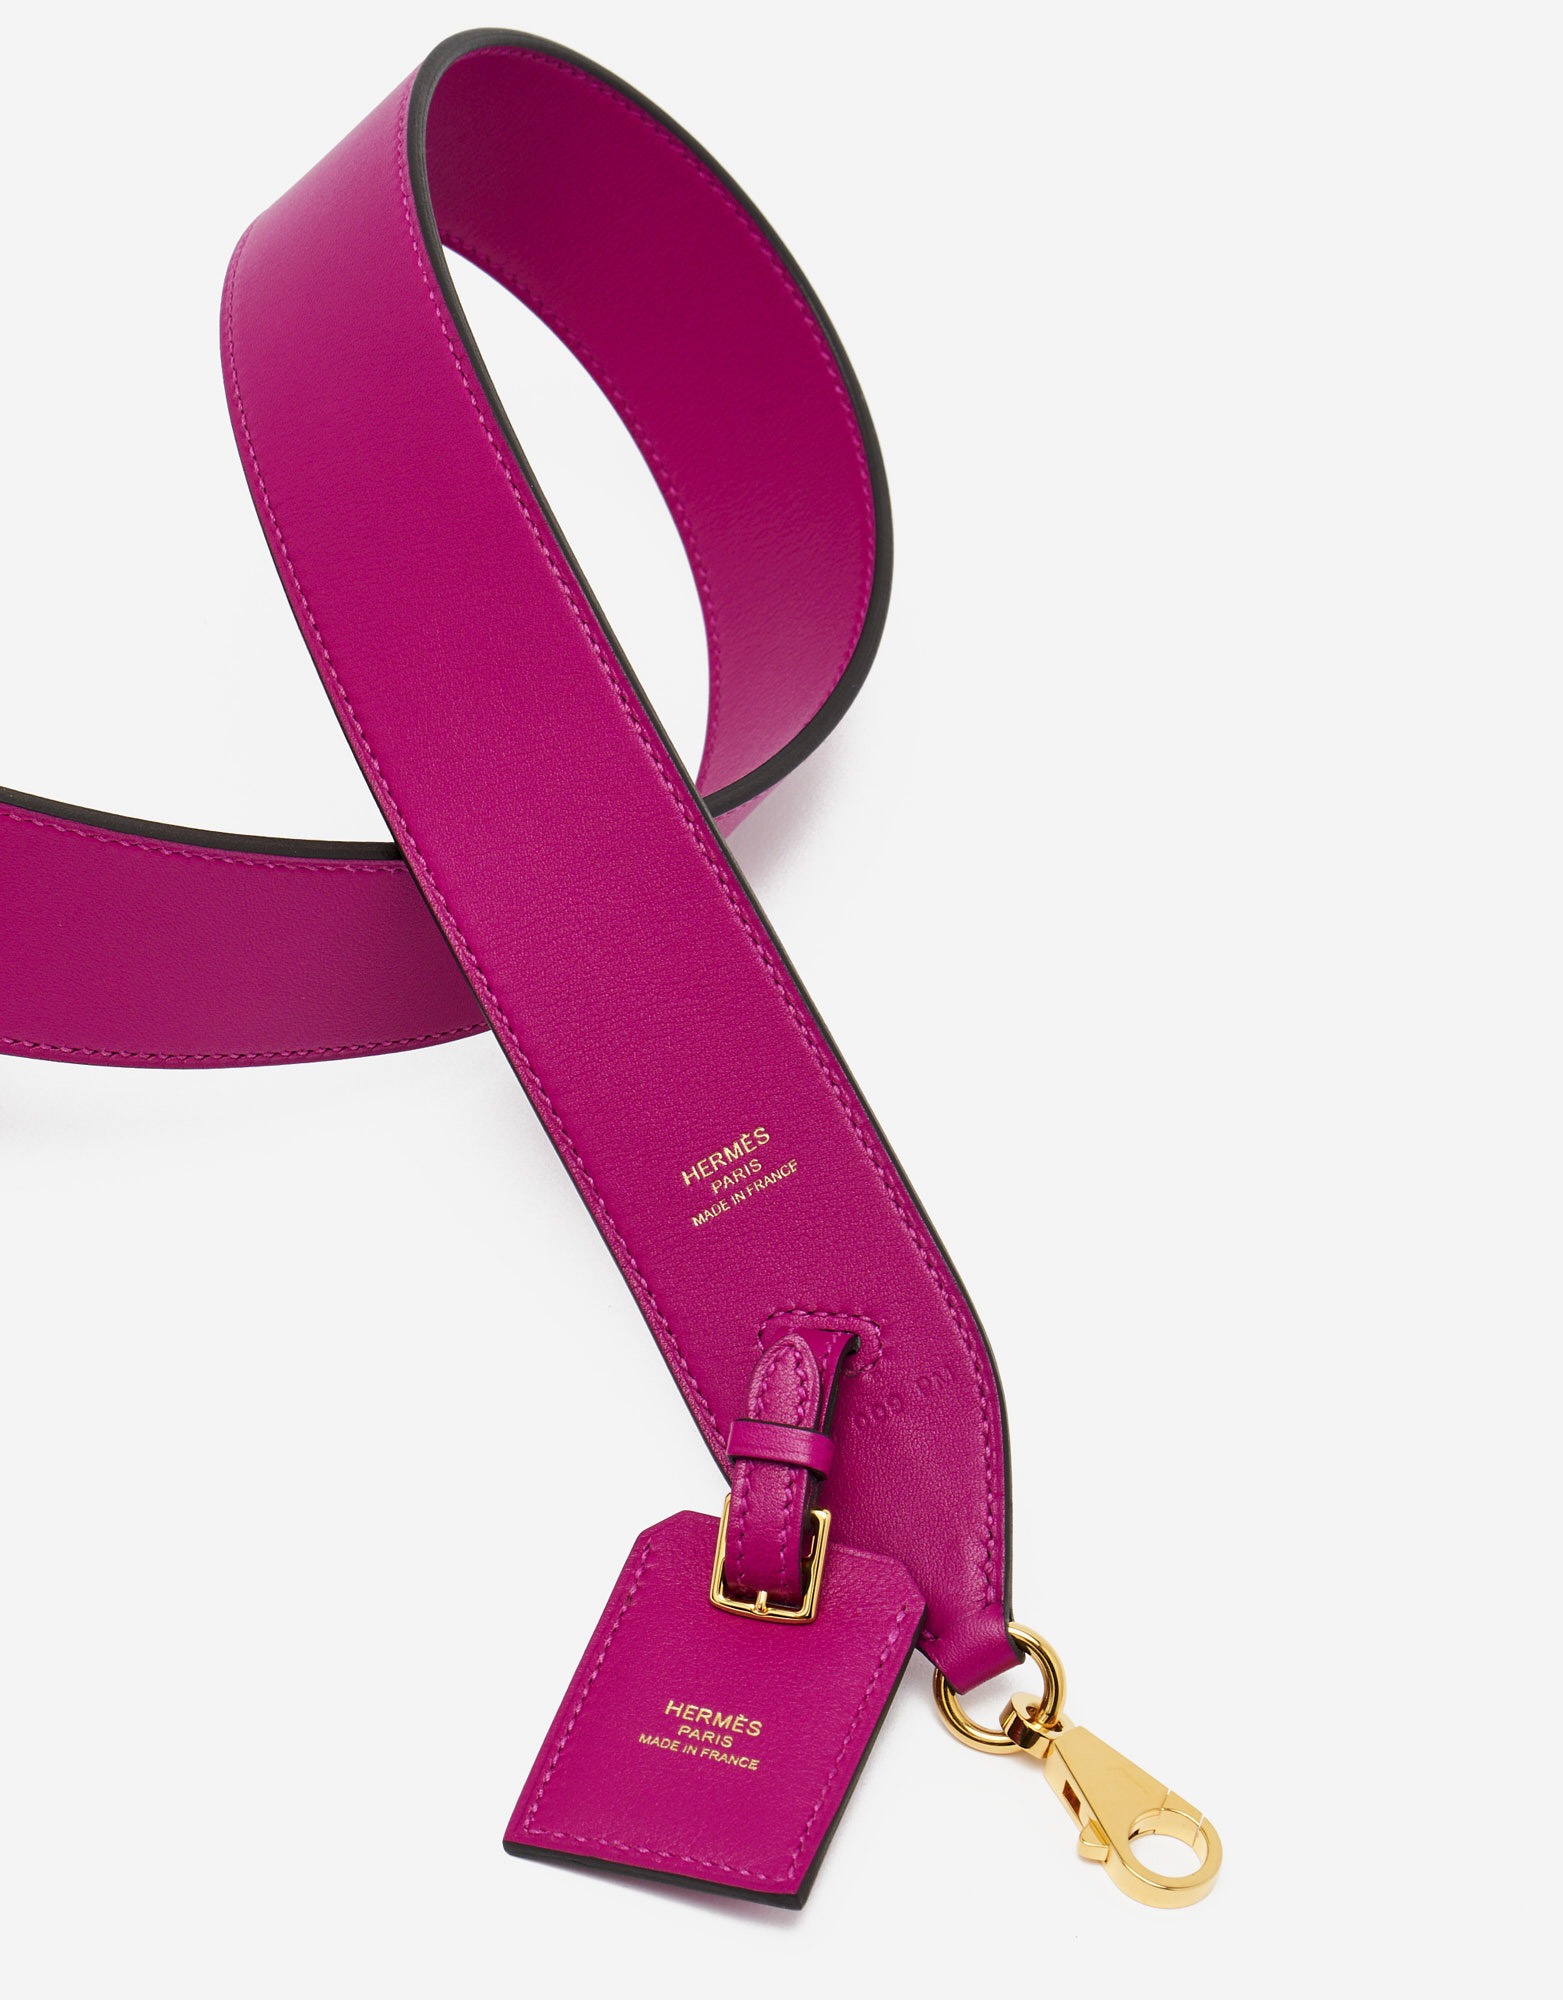 A ROSE POURPRE SWIFT LEATHER CLOCHETTE SHOULDER STRAP WITH GOLD HARDWARE,  HERMÈS, 2017